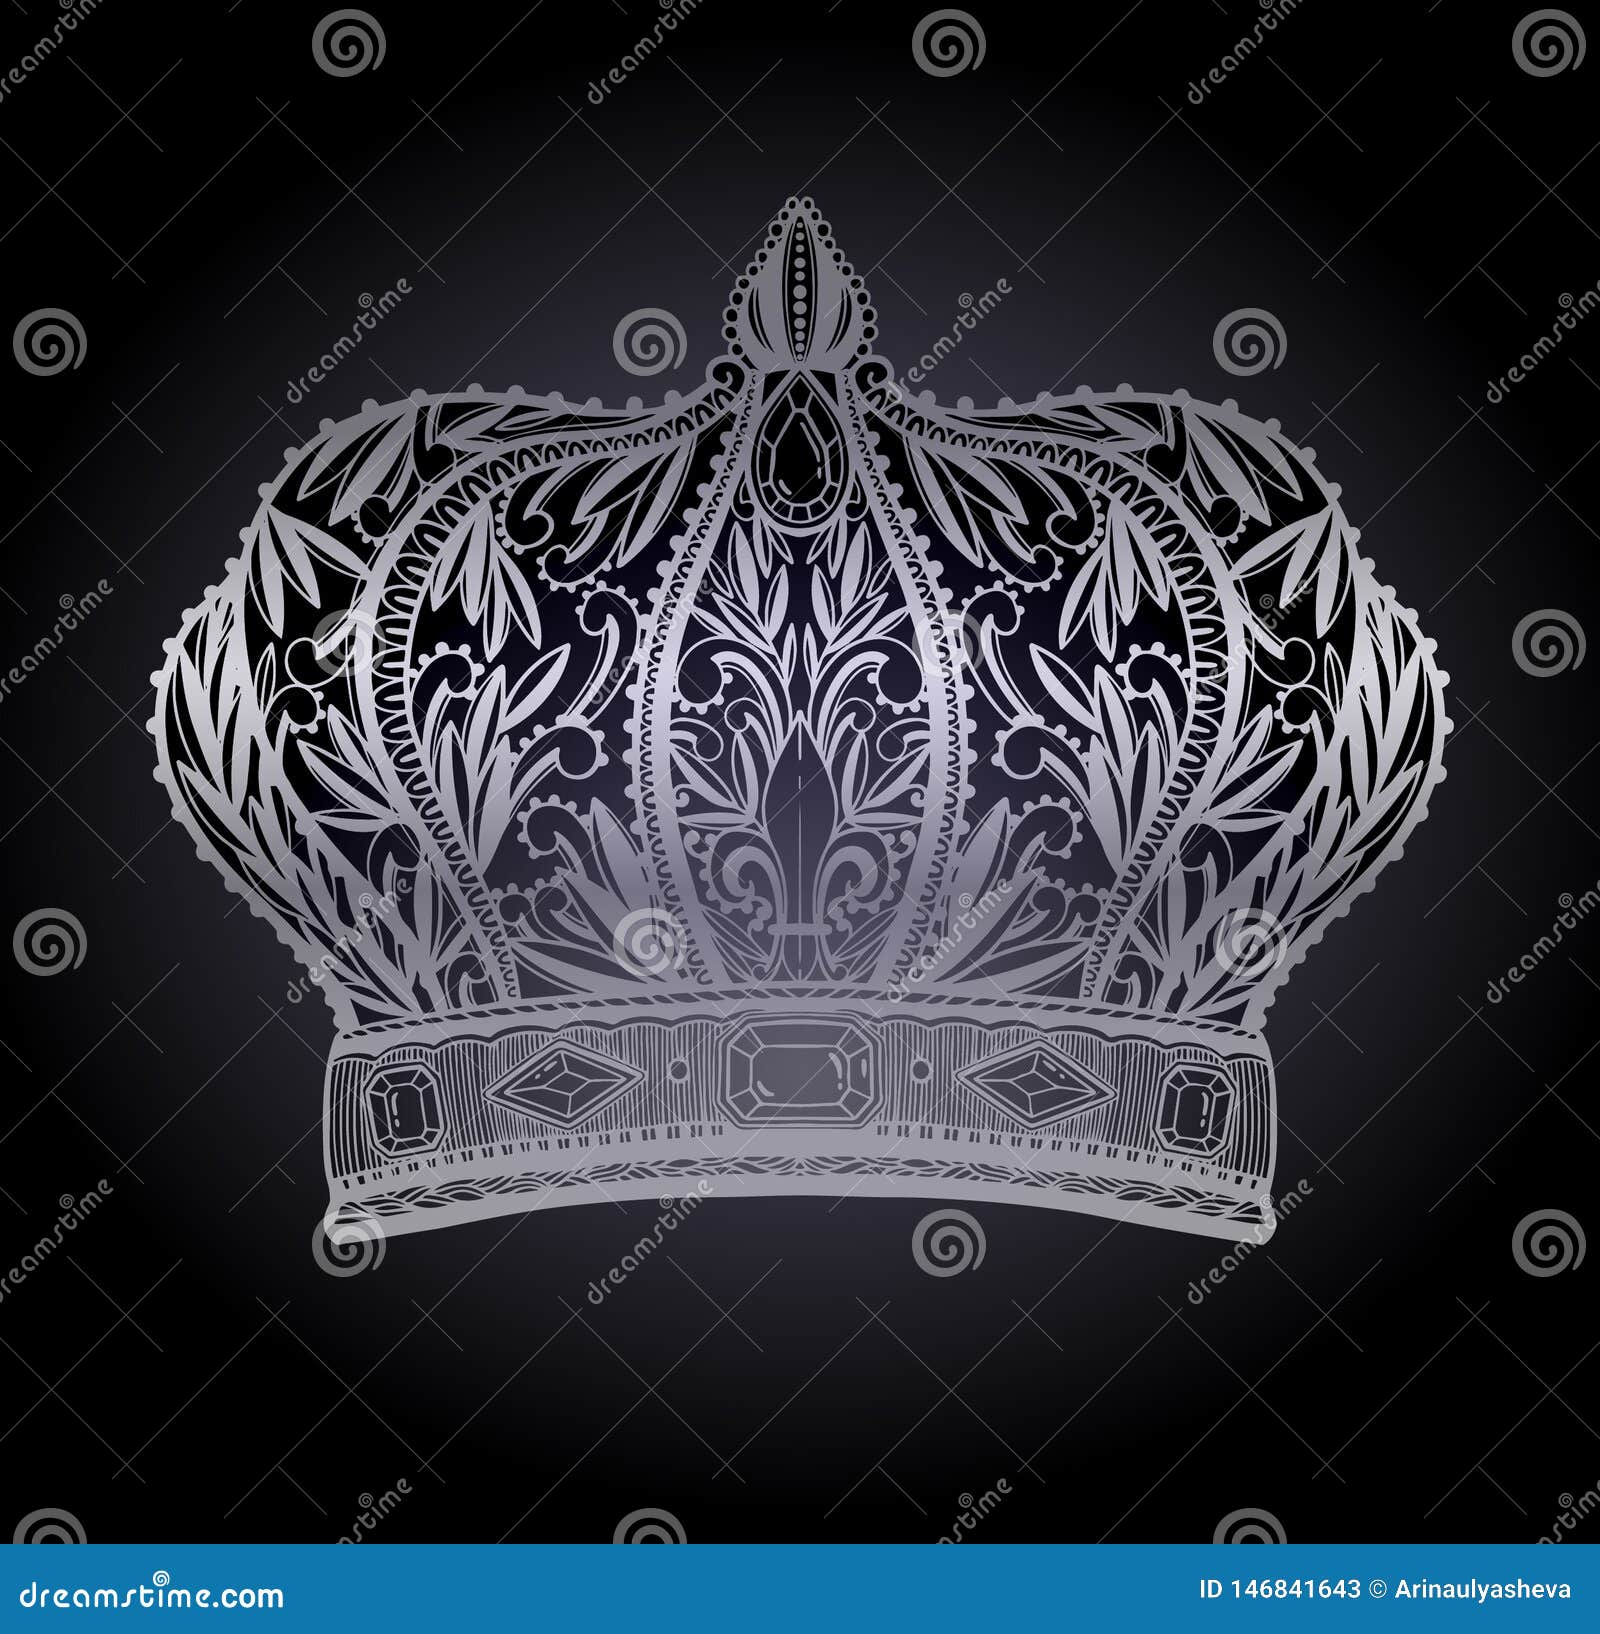 Cool Black Queen Crown Drawing | Barnes Family